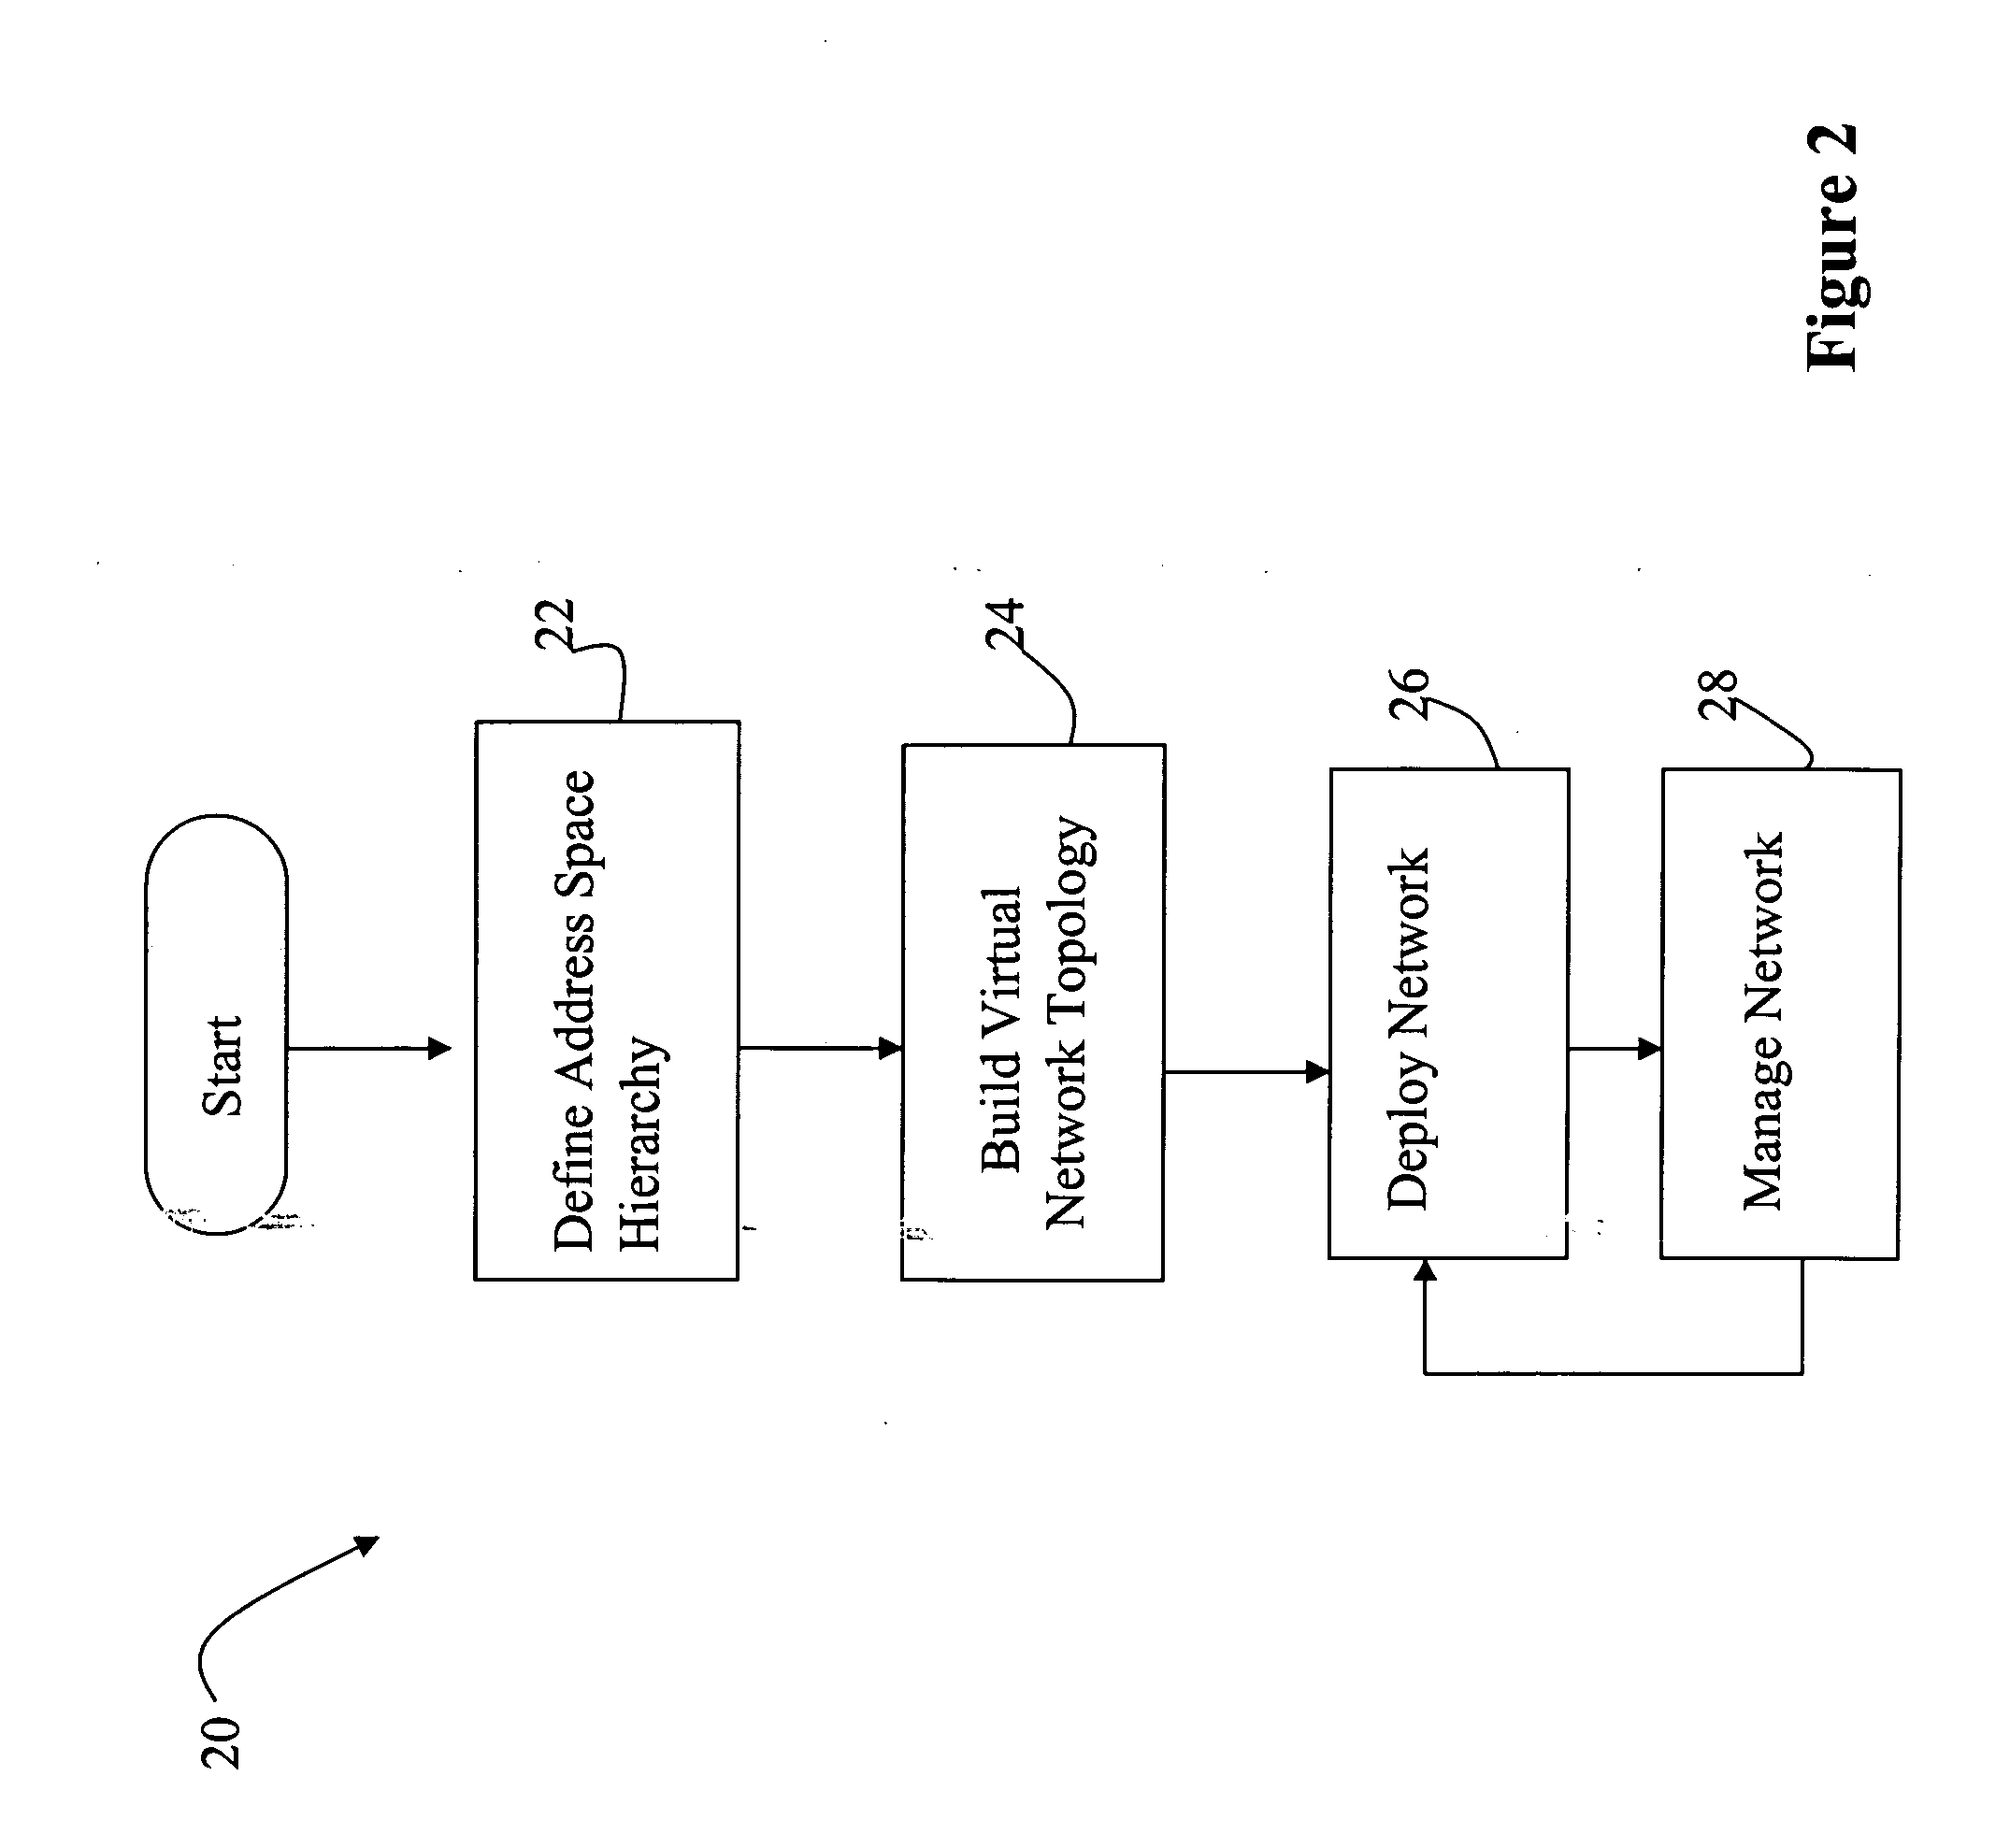 Dynamic hierarchical address resource management architecture, method and apparatus